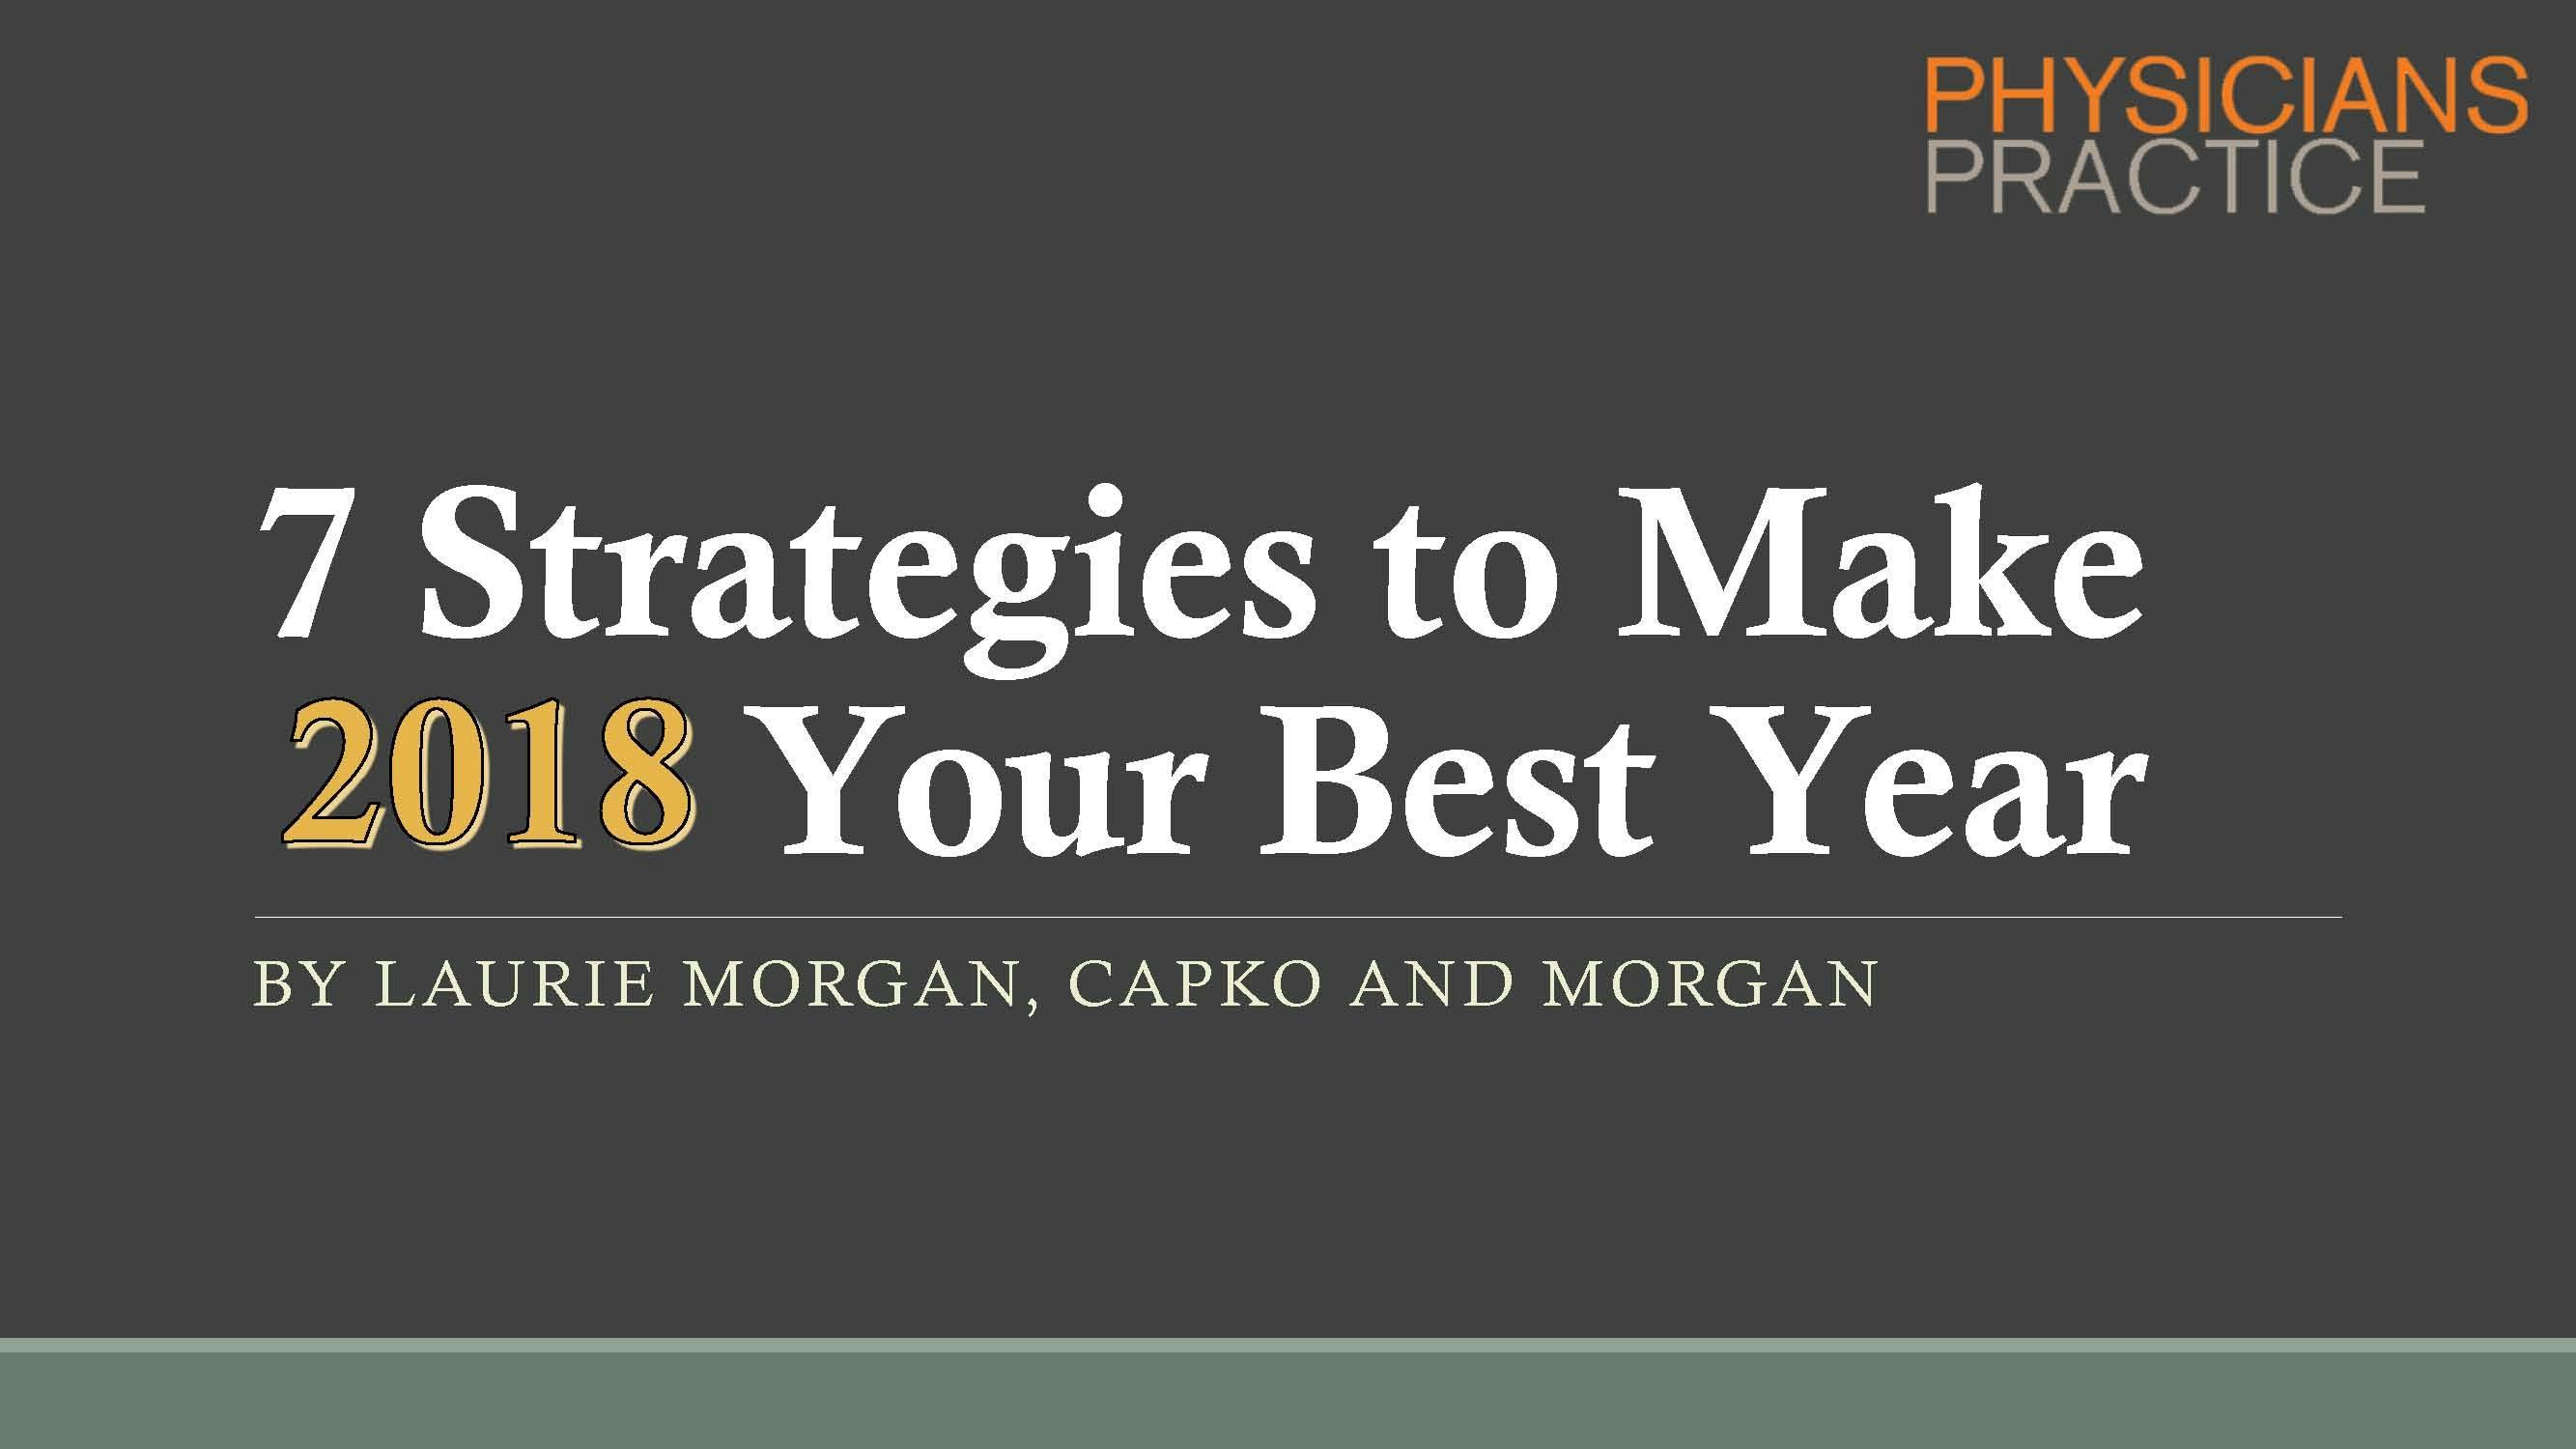 7 Strategies to Make 2018 Your Best Year  